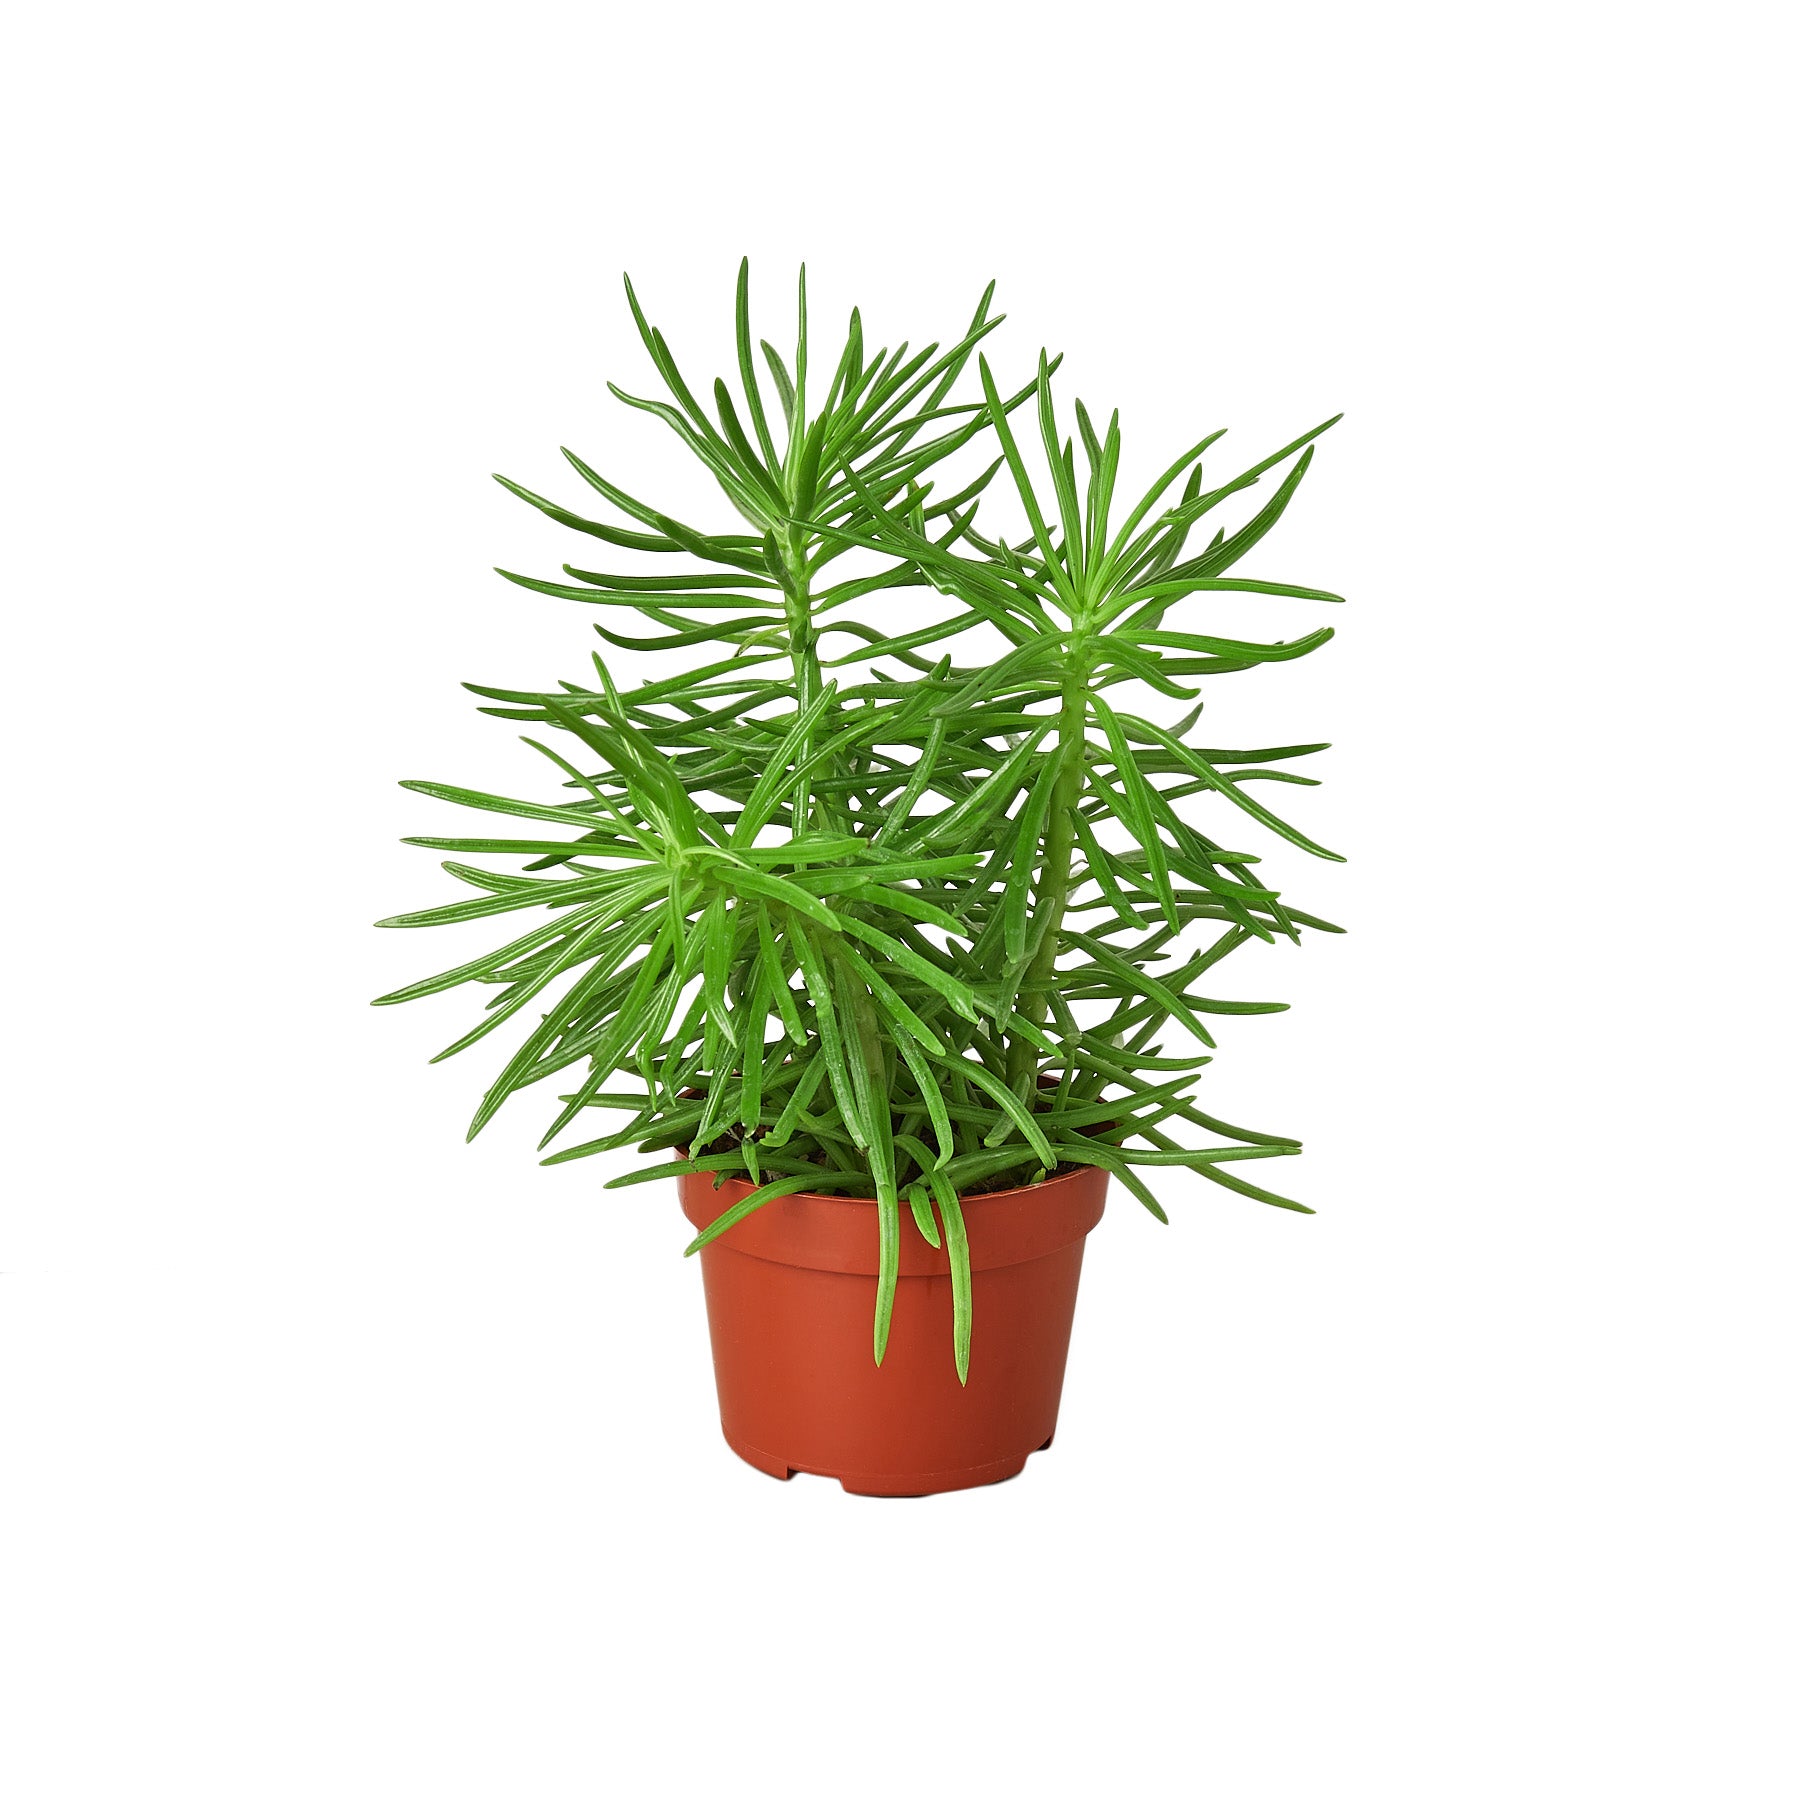 A small plant in a pot on a white background. (Keywords: plant nursery near me, garden centers)